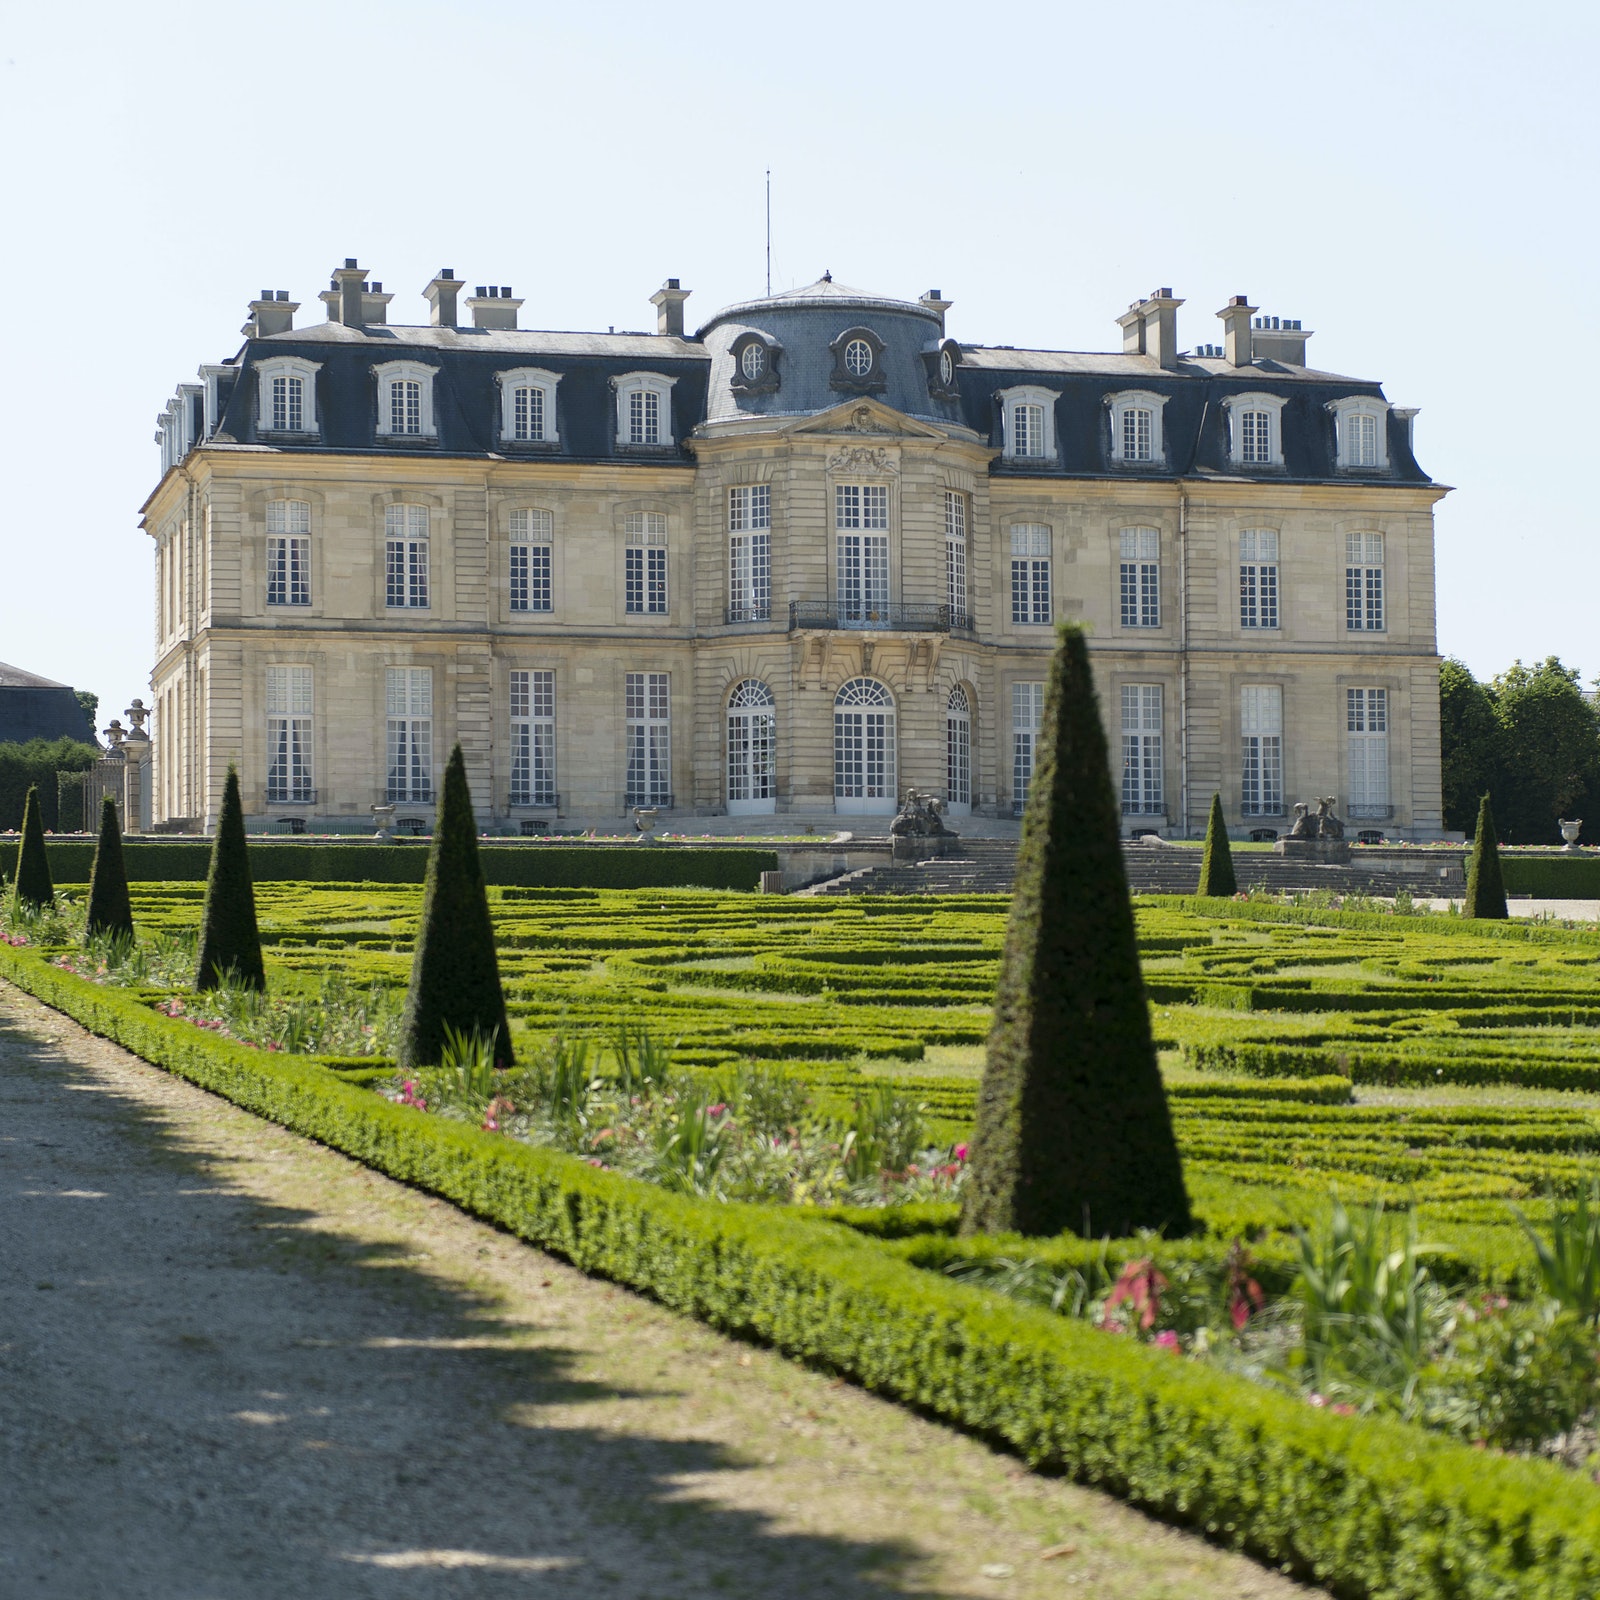 Champs-sur-Marne Château and Gardens in France